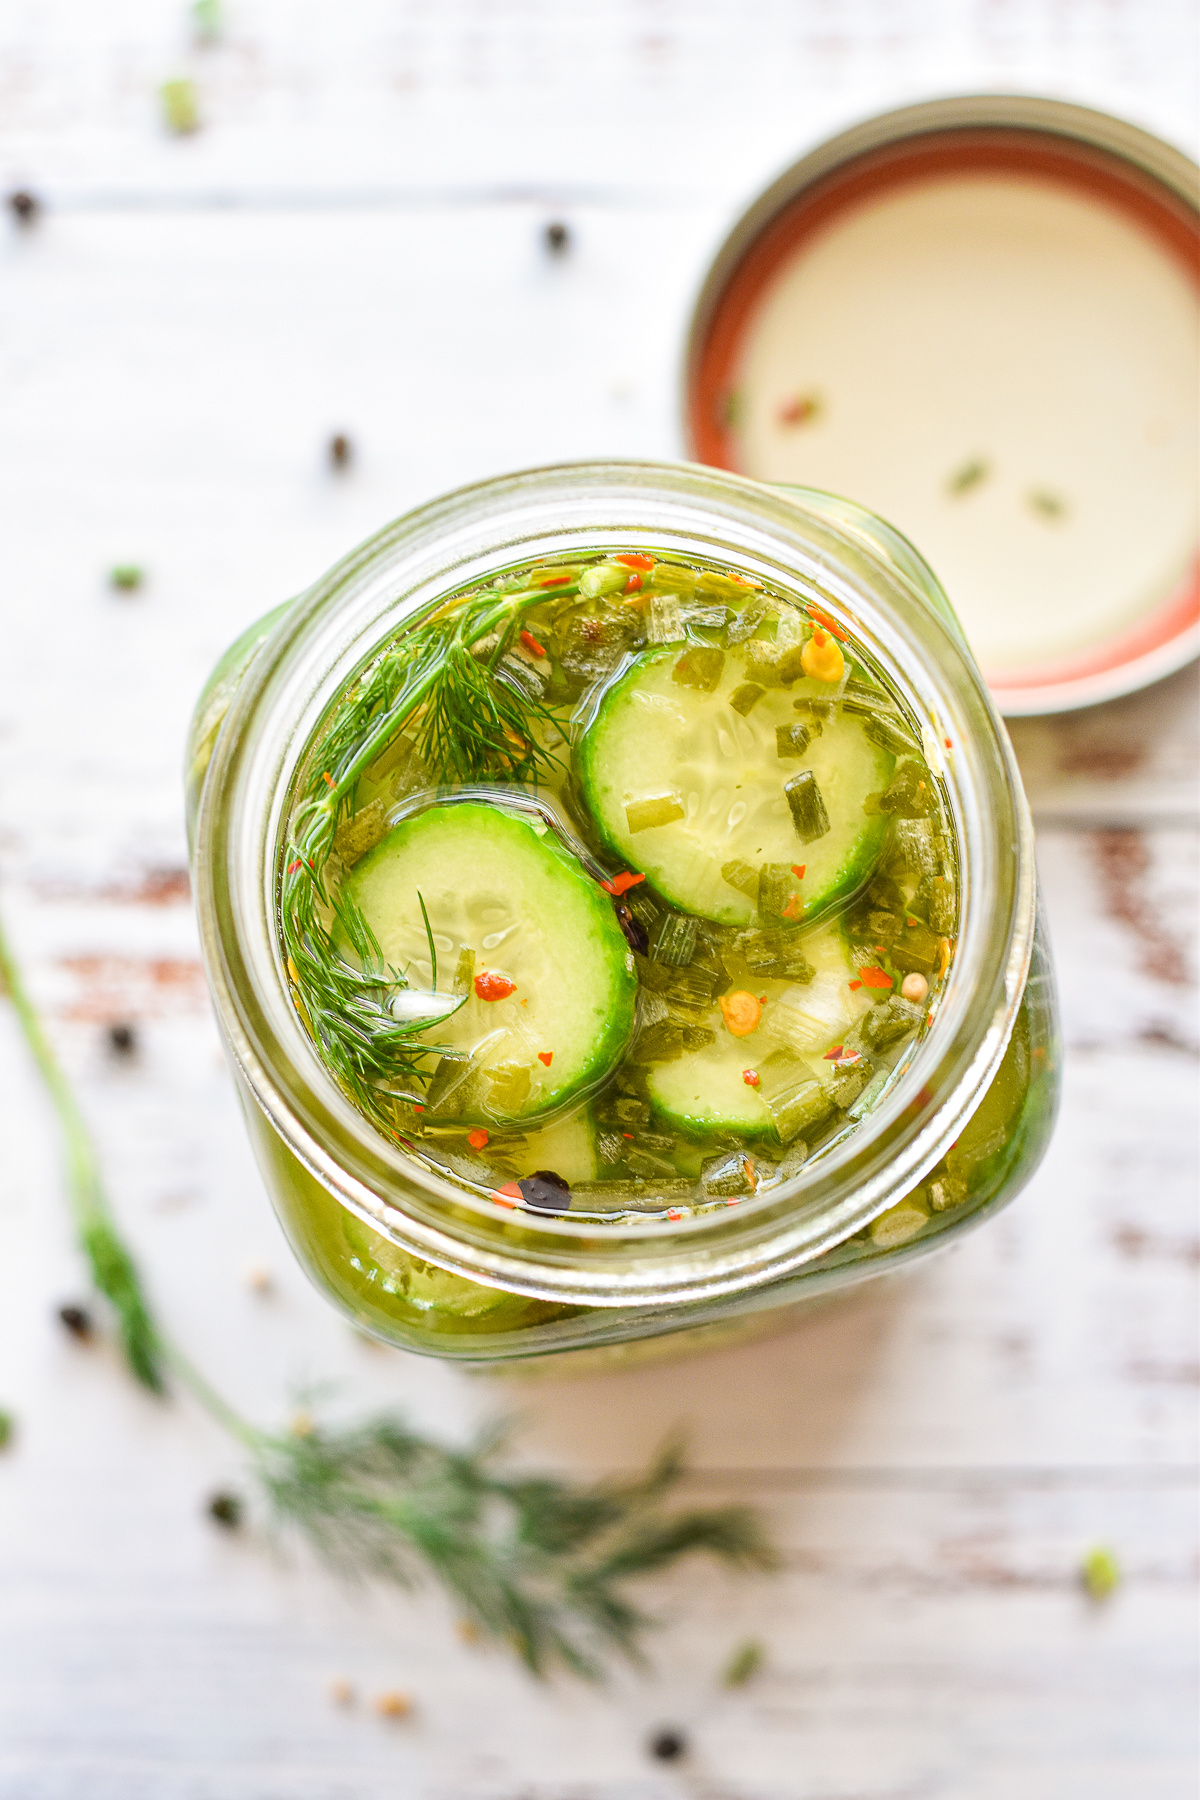 low fodmap pickles in a mason jar next to a sprig of fresh dill and spices